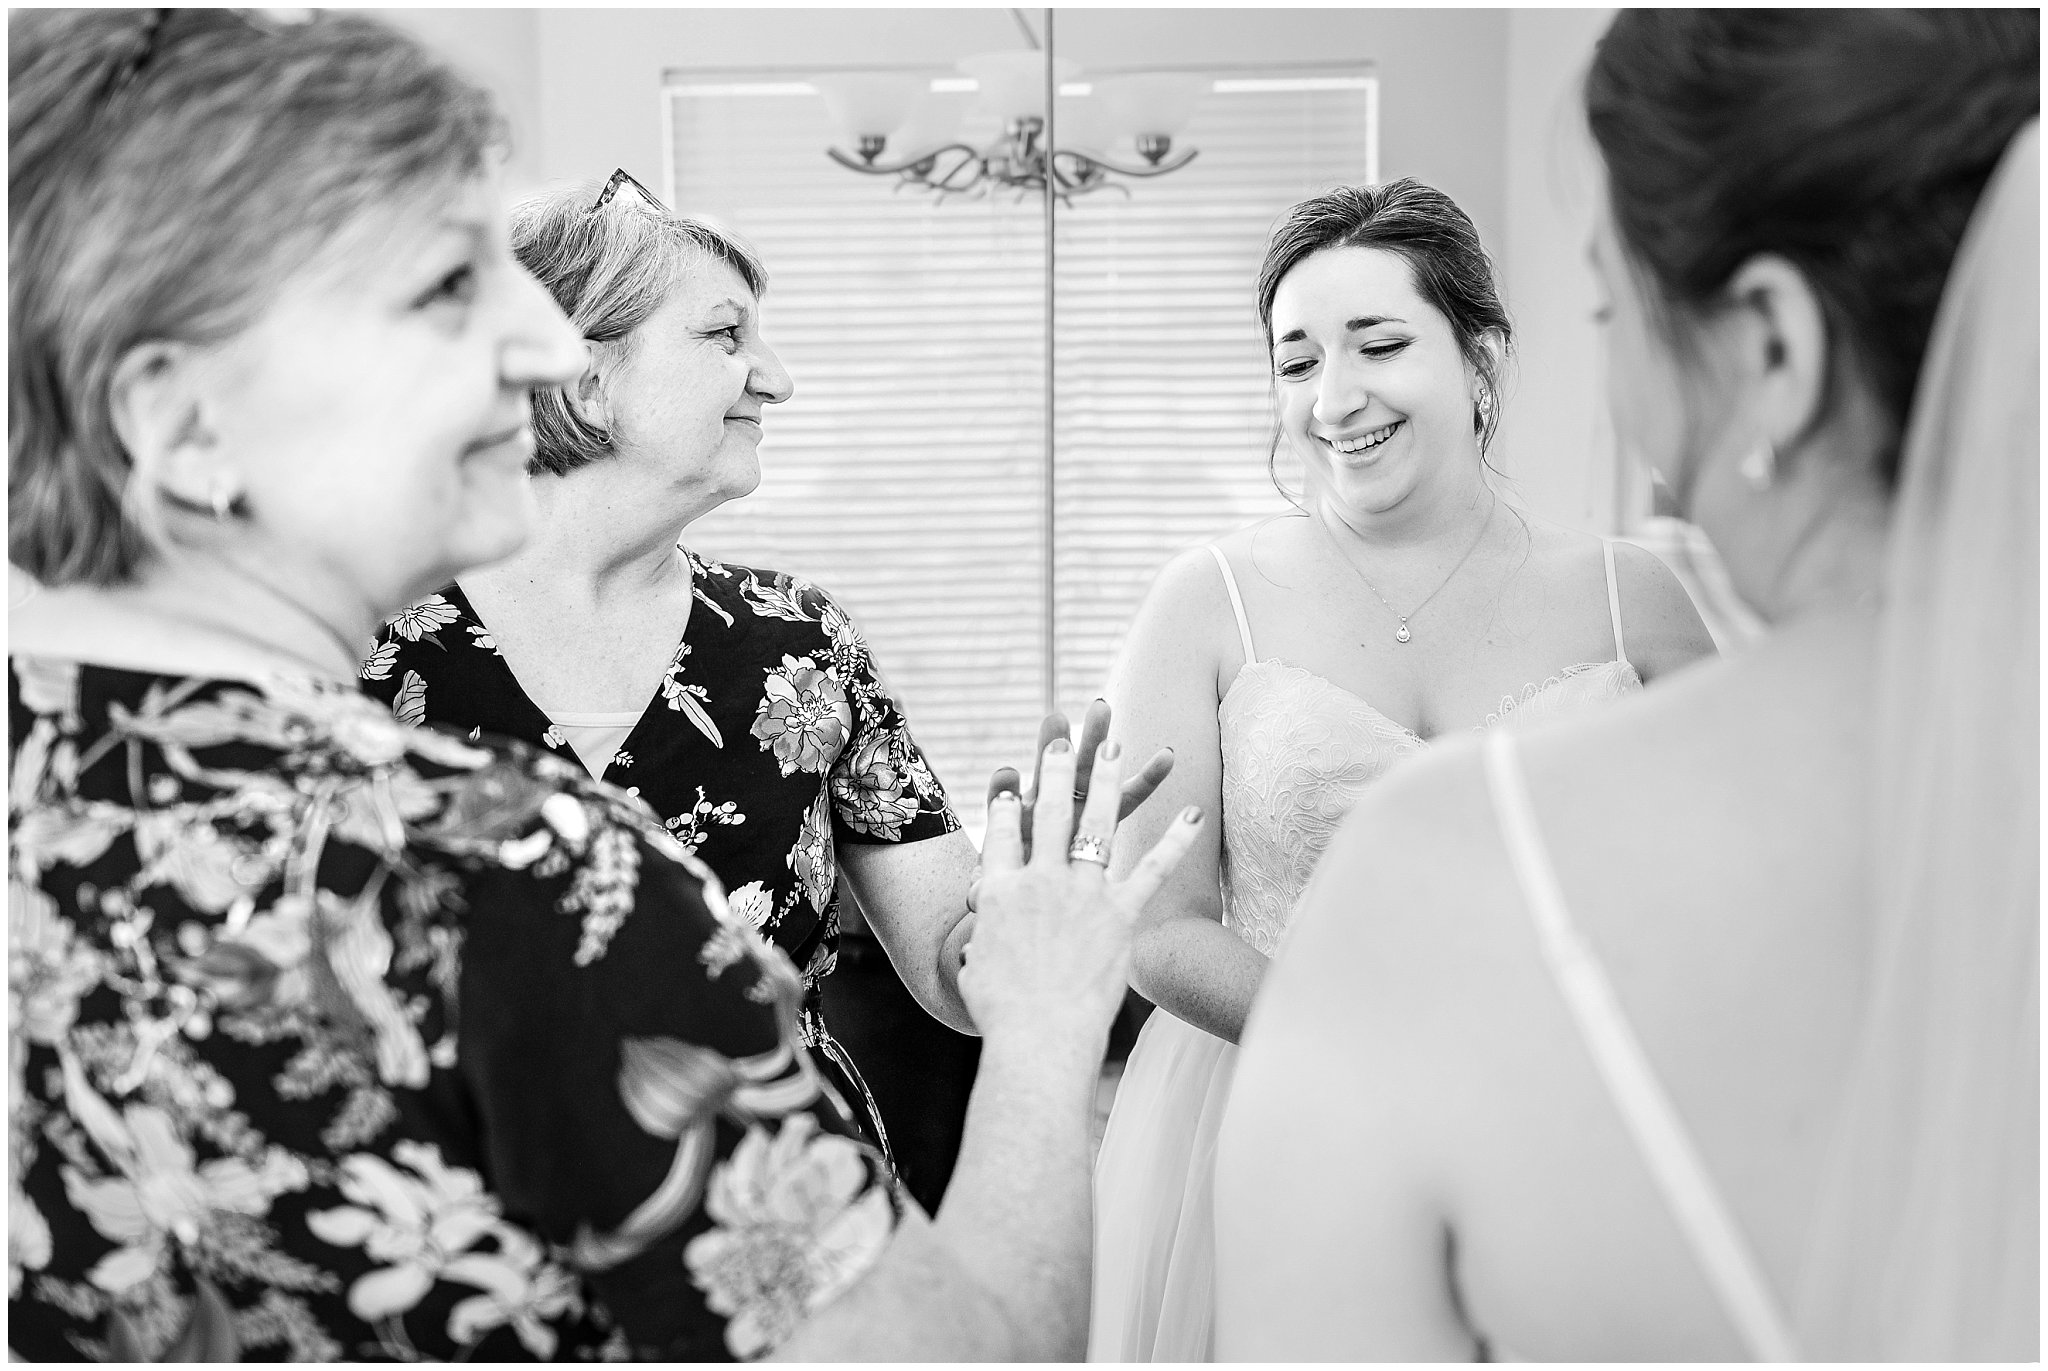 Bride getting ready with bridesmaid and mom | Intimate Utah Summer Garden Wedding | Jessie and Dallin Photography